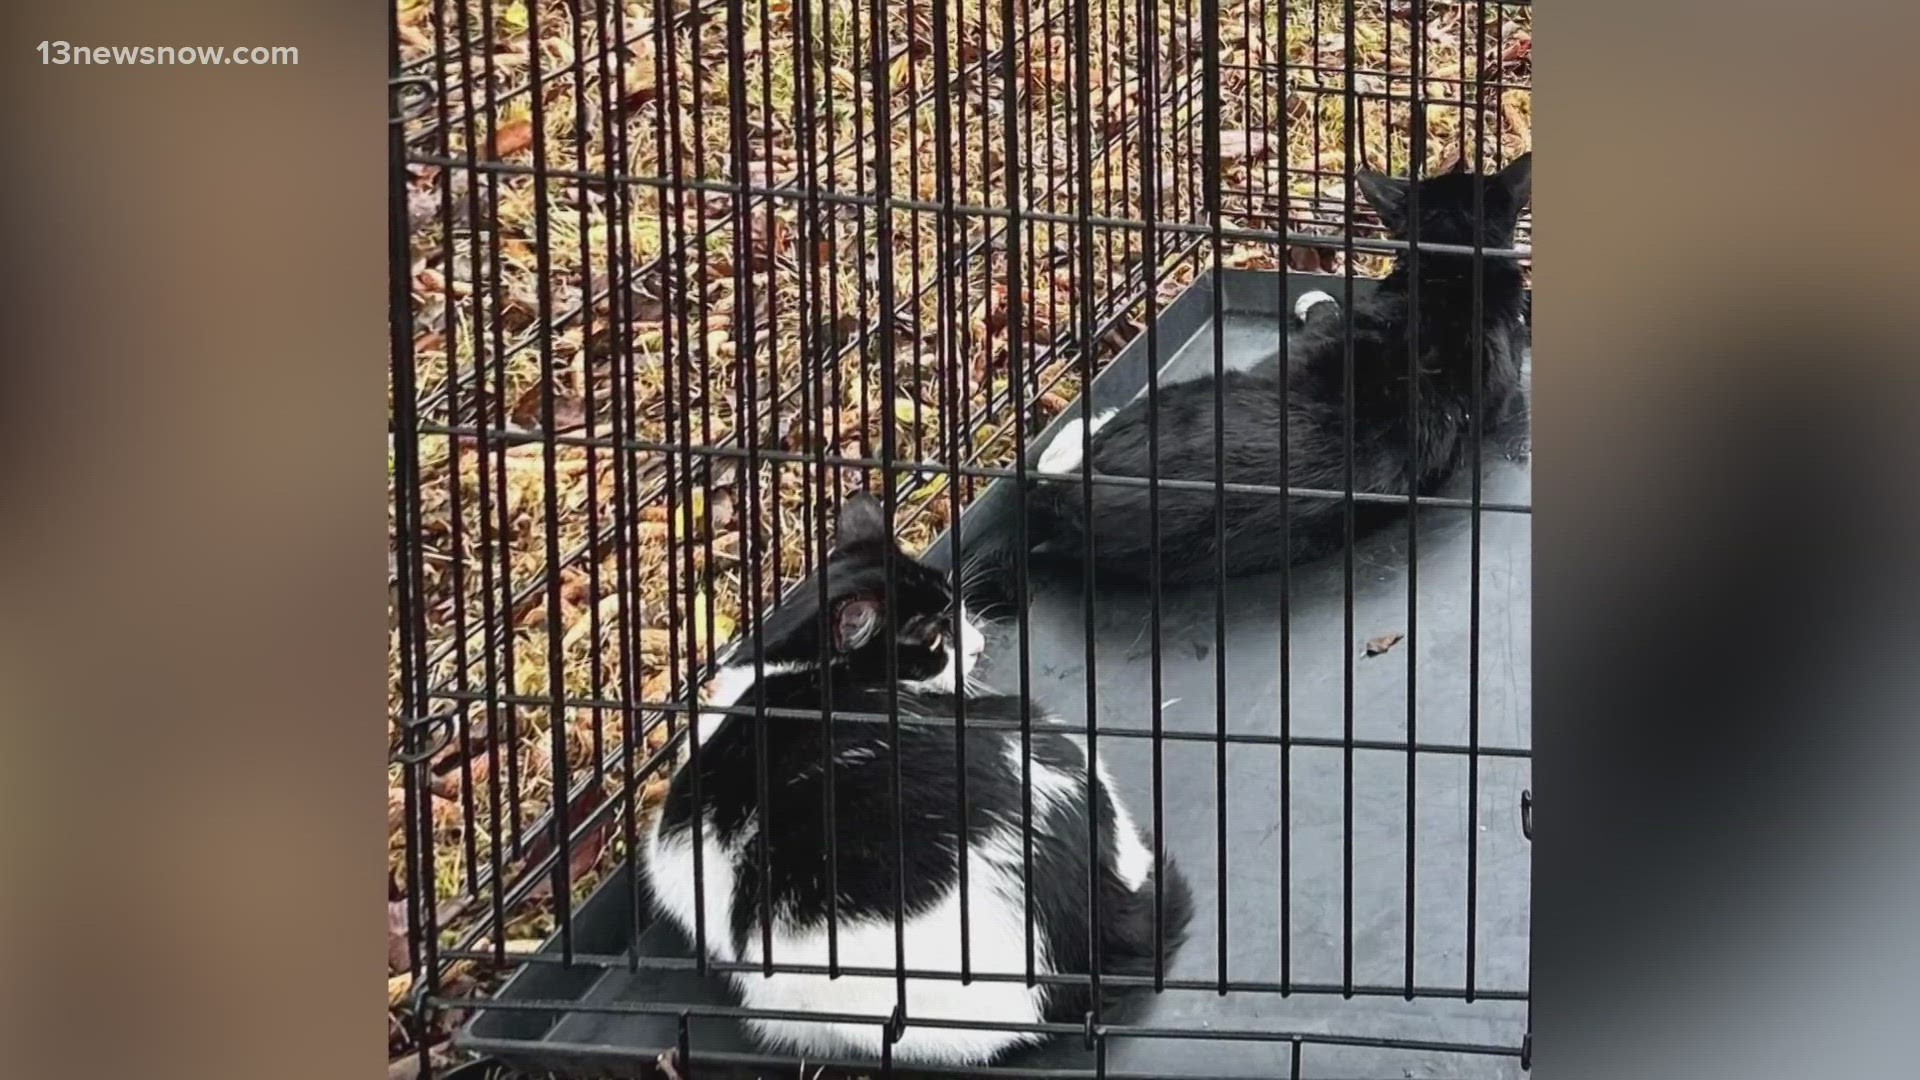 As firefighters worked to rescue the cats, officials say some of the felines bit through their gear, leaving bite and scratch marks.